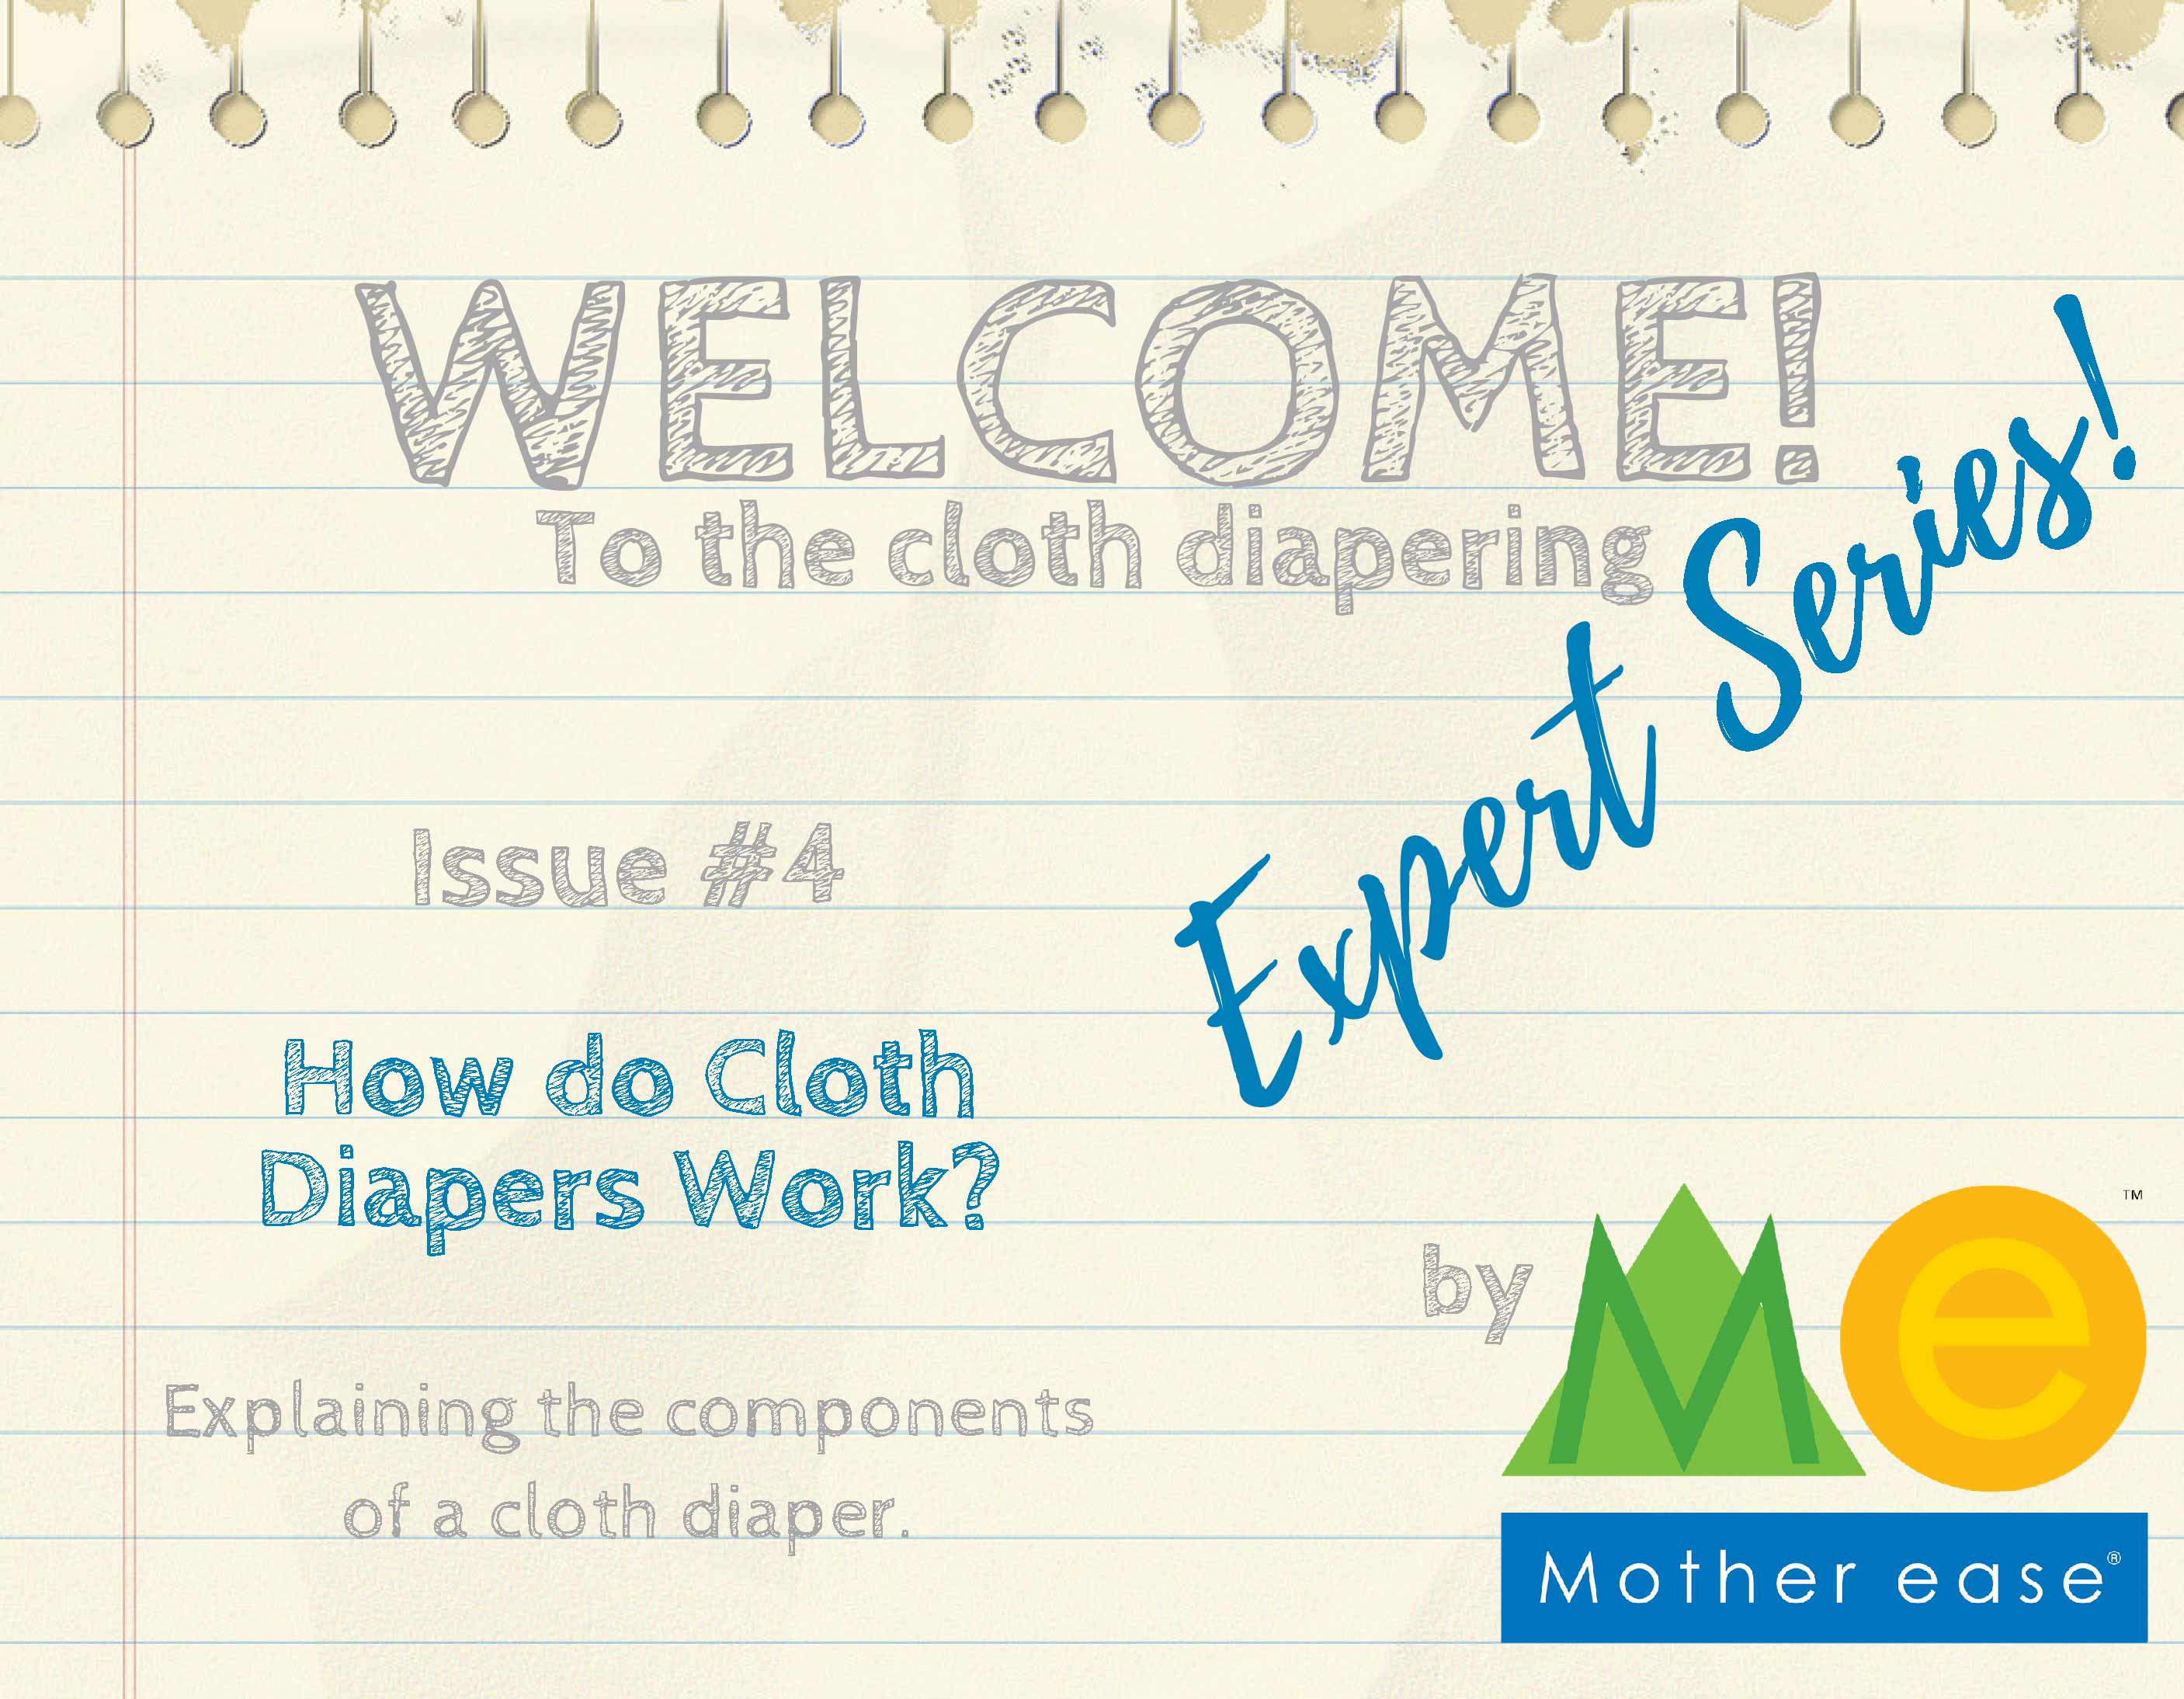 All About Cloth Diaper Absorbency - Diaper Absorbency Guide